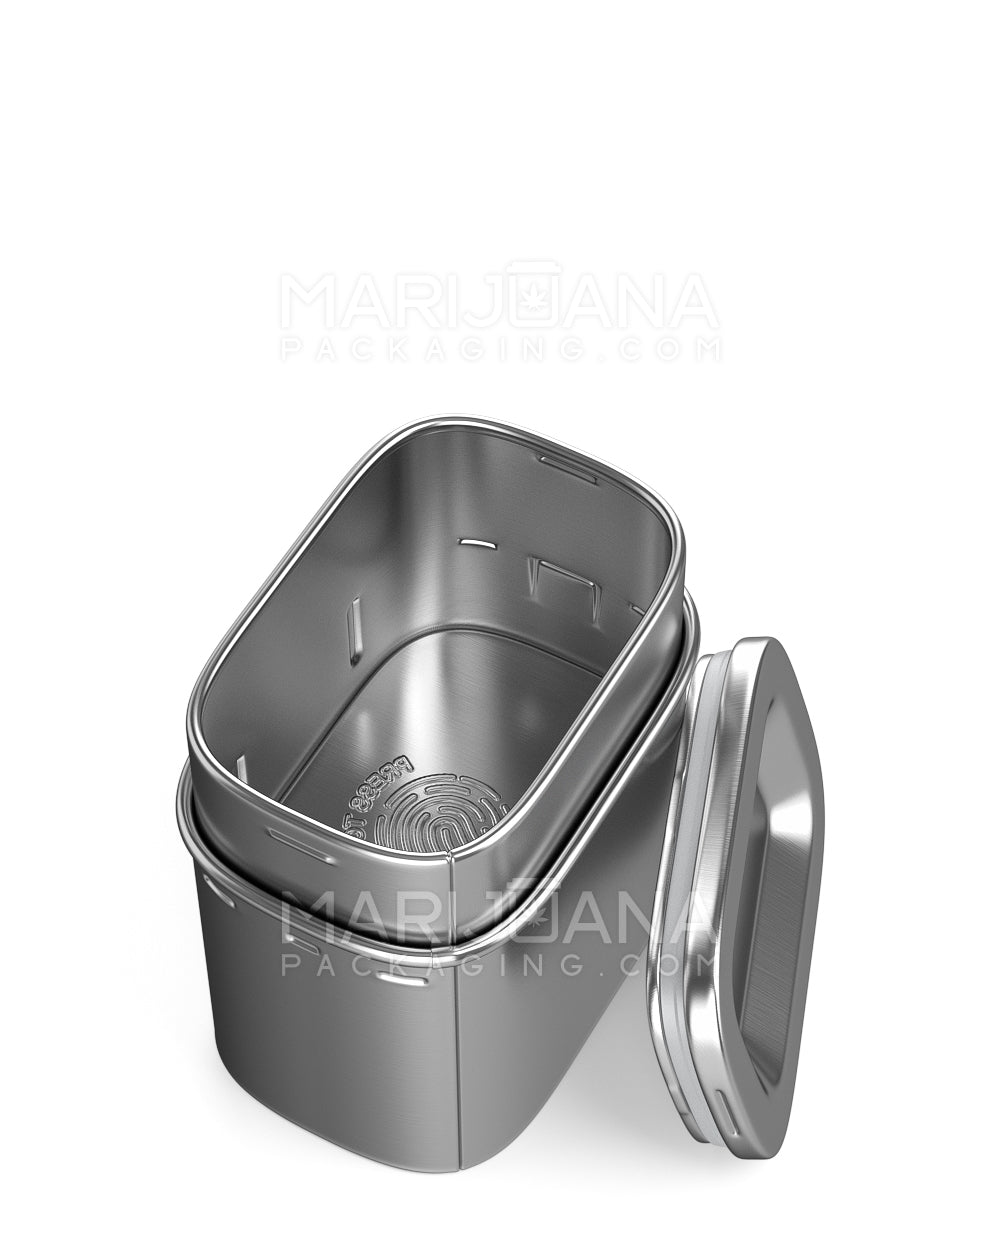 Child Resistant & Sustainable | 100% Recyclable PushTin Medium Container | 2oz - Silver Tin - 200 Count - 6